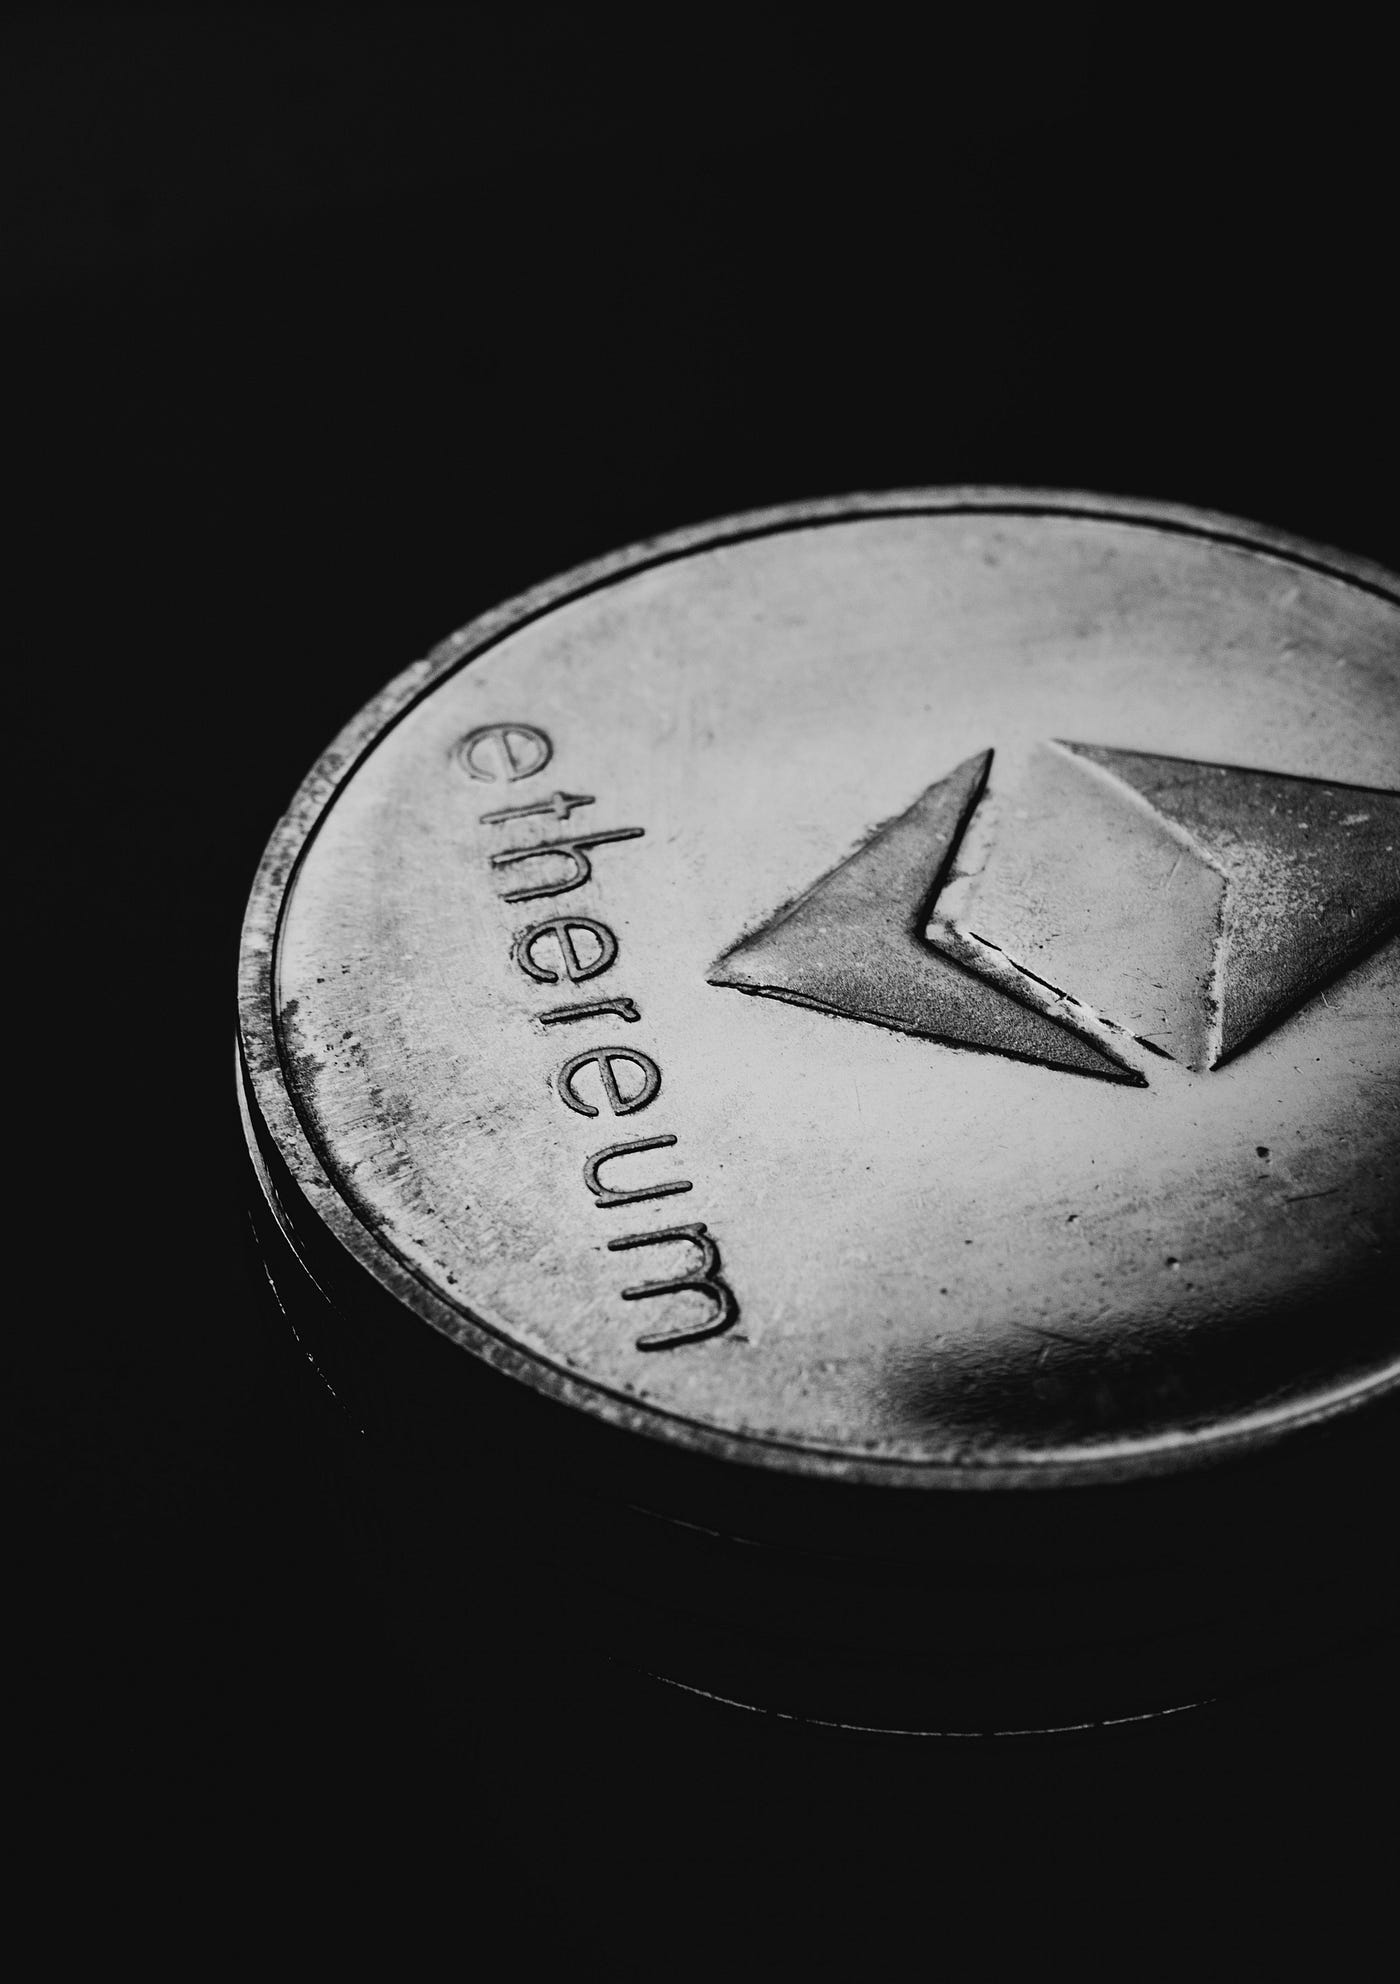 Coin of Ethereum logo and name